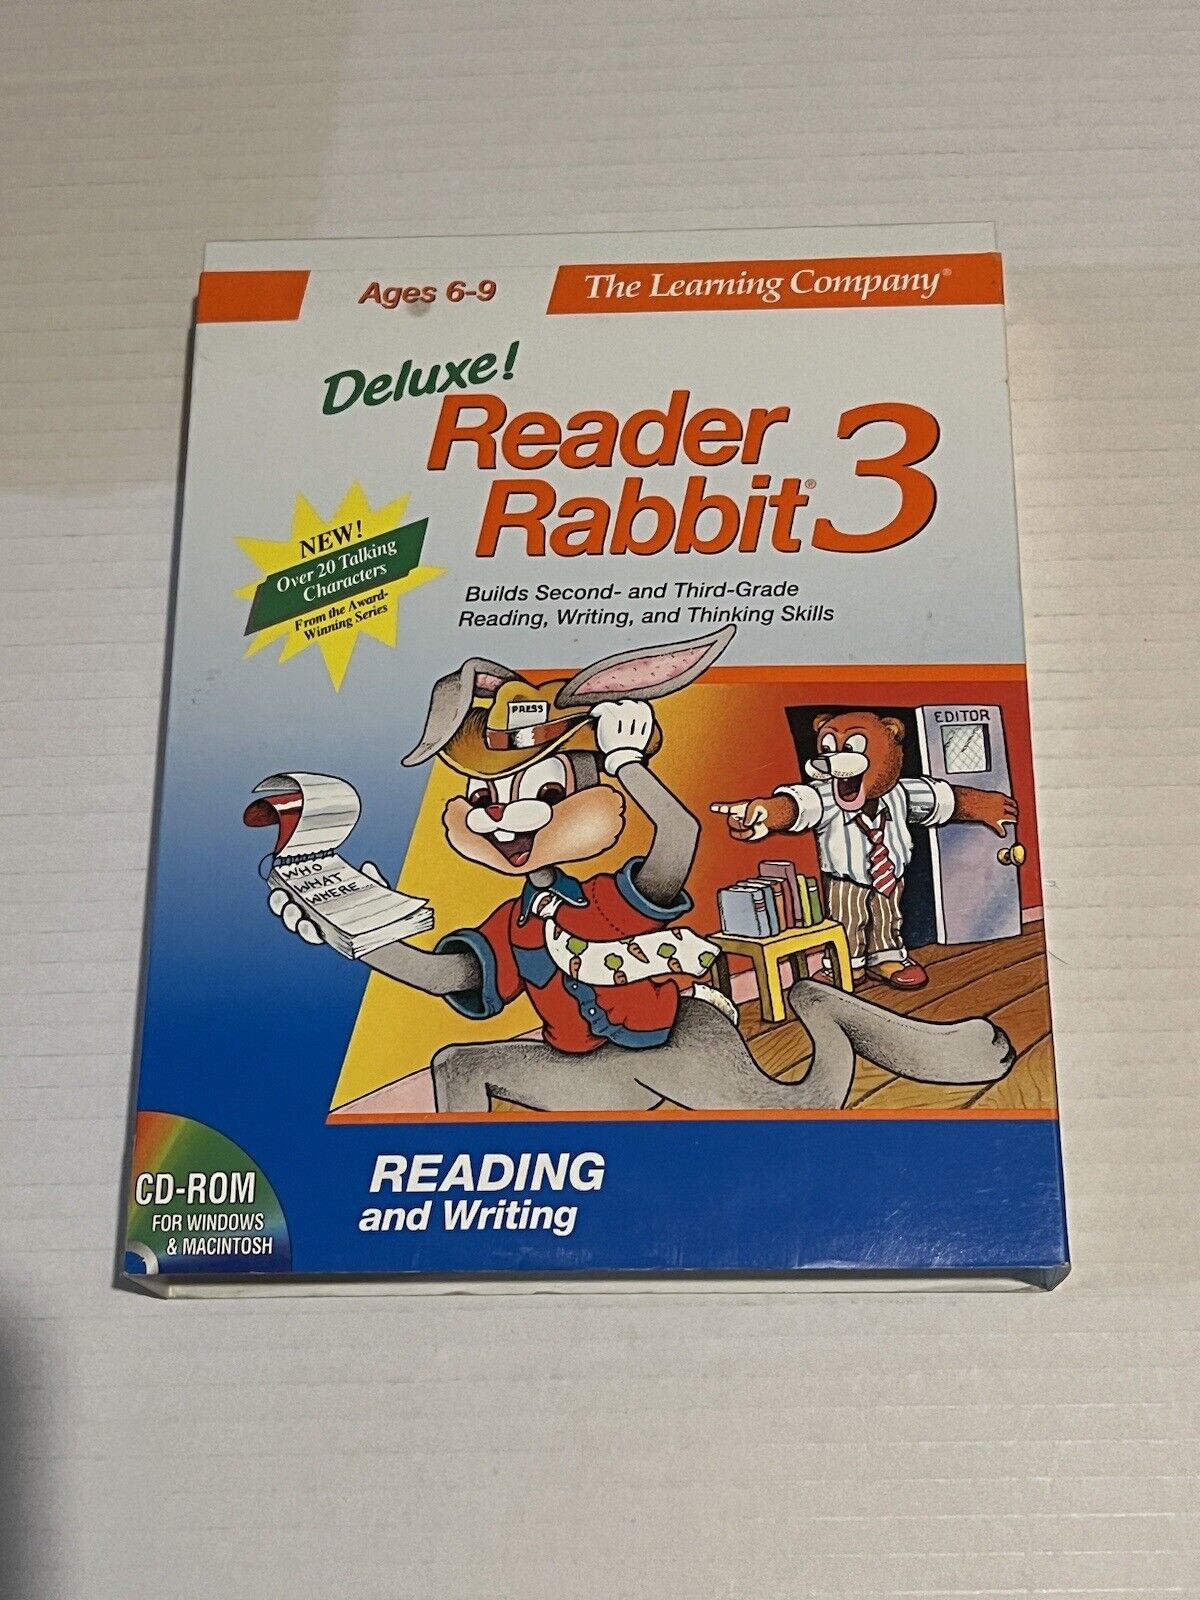 READER RABBIT 3 Deluxe Learning Company 1997 CD-ROM Video Game Windows Mac